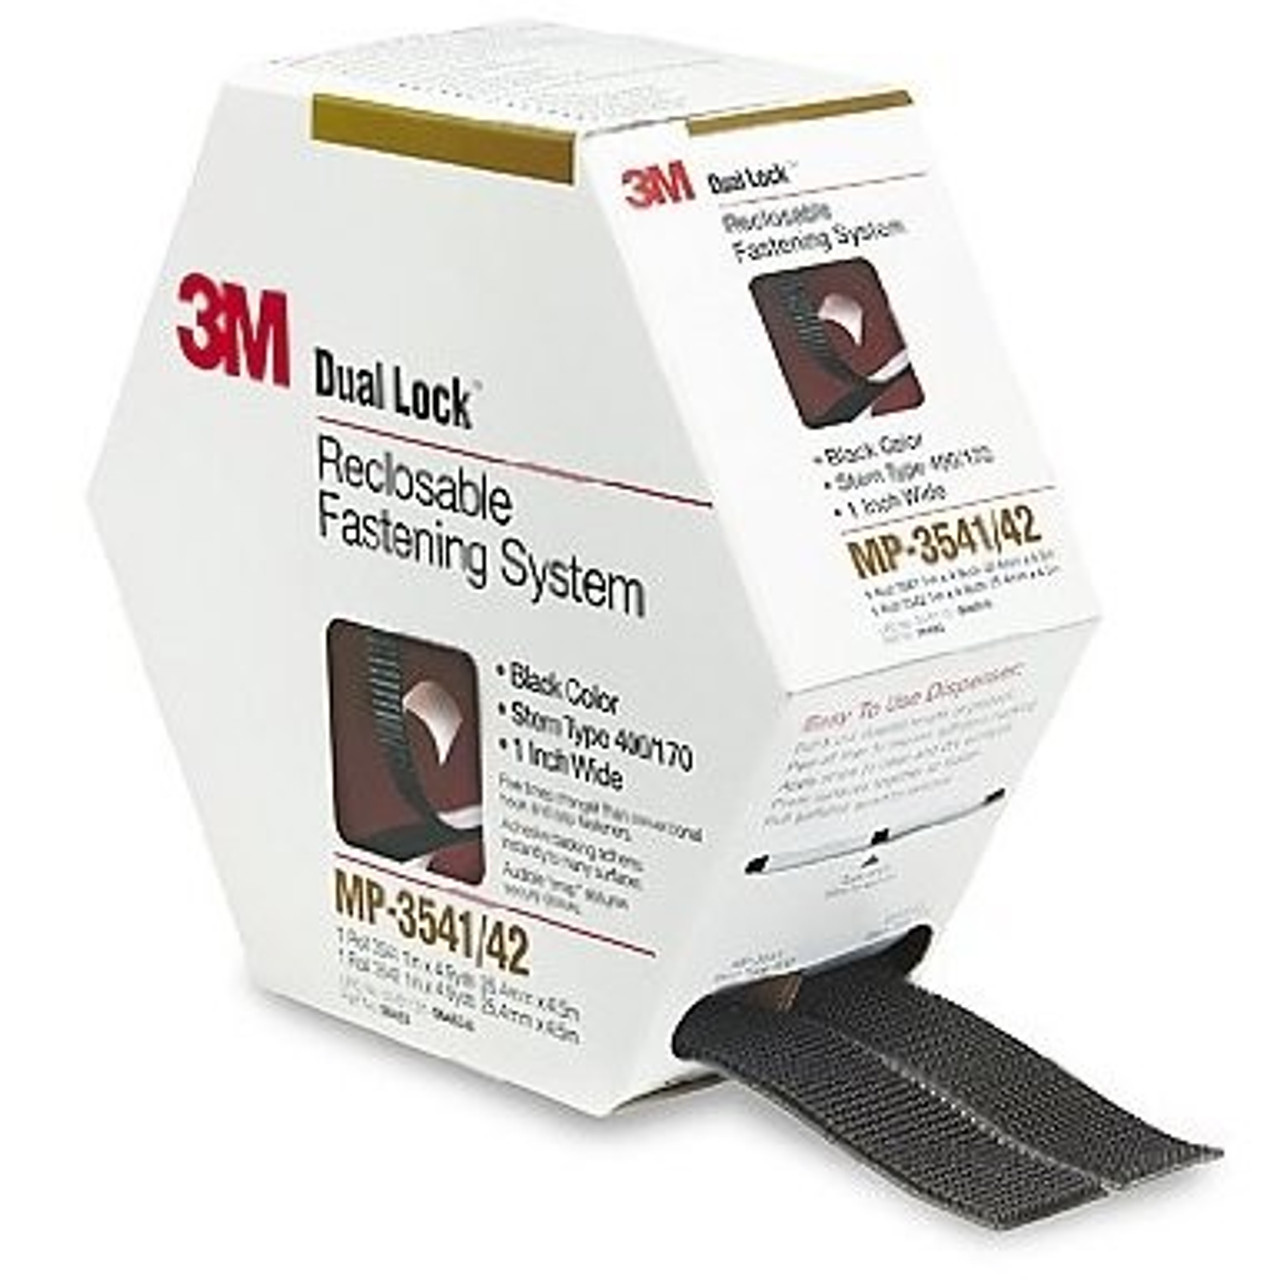 3M Hook and Loop Fastening System